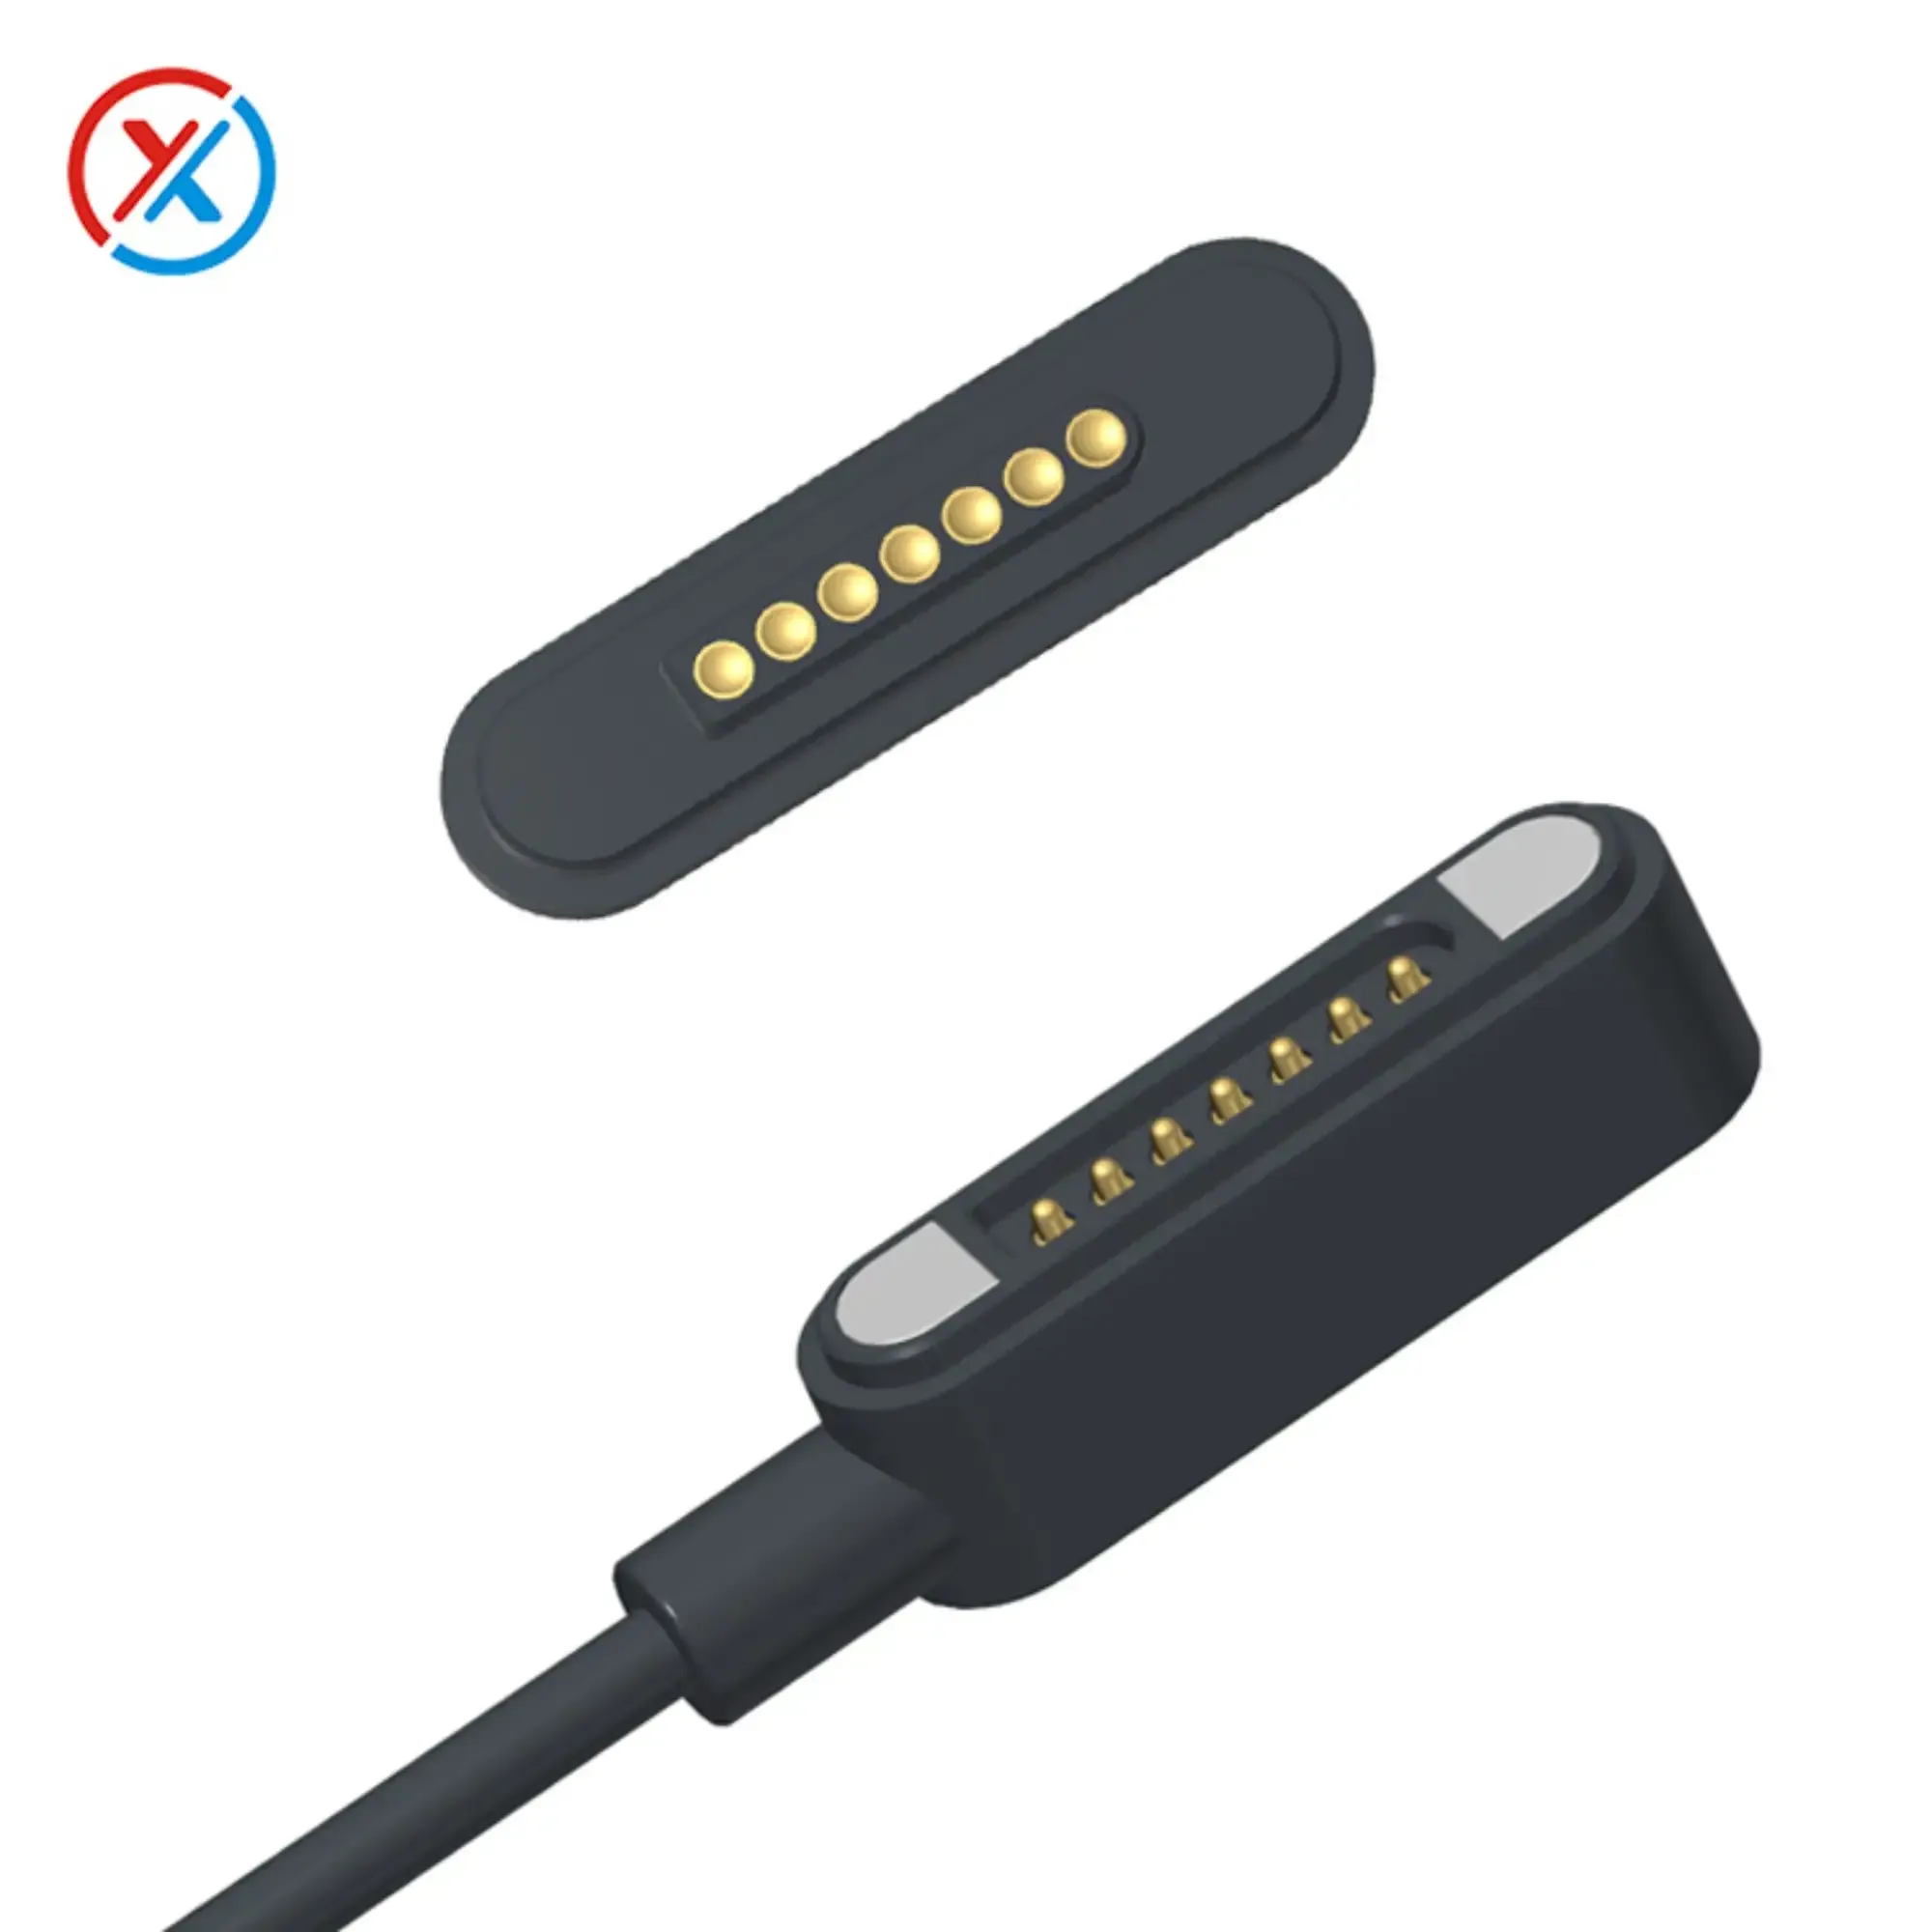 The Revolutionary Runway Shape Magnetic Cable